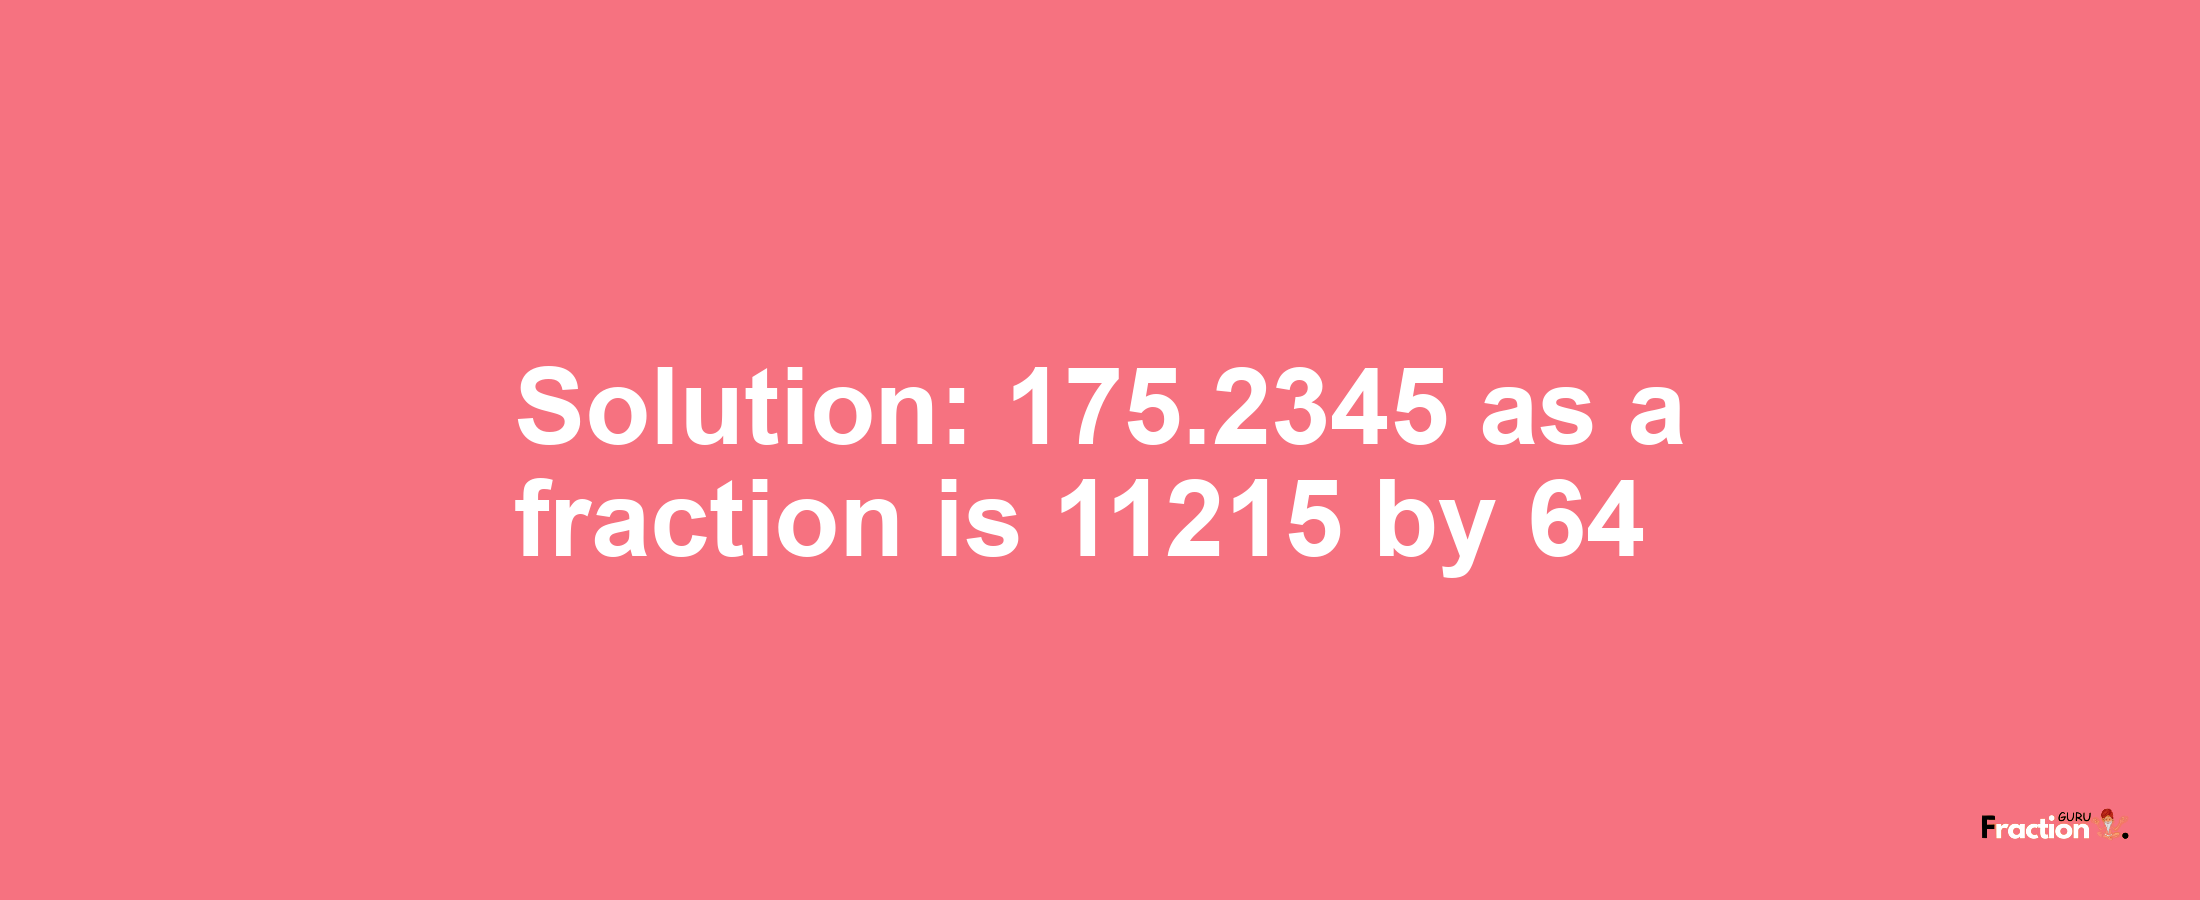 Solution:175.2345 as a fraction is 11215/64